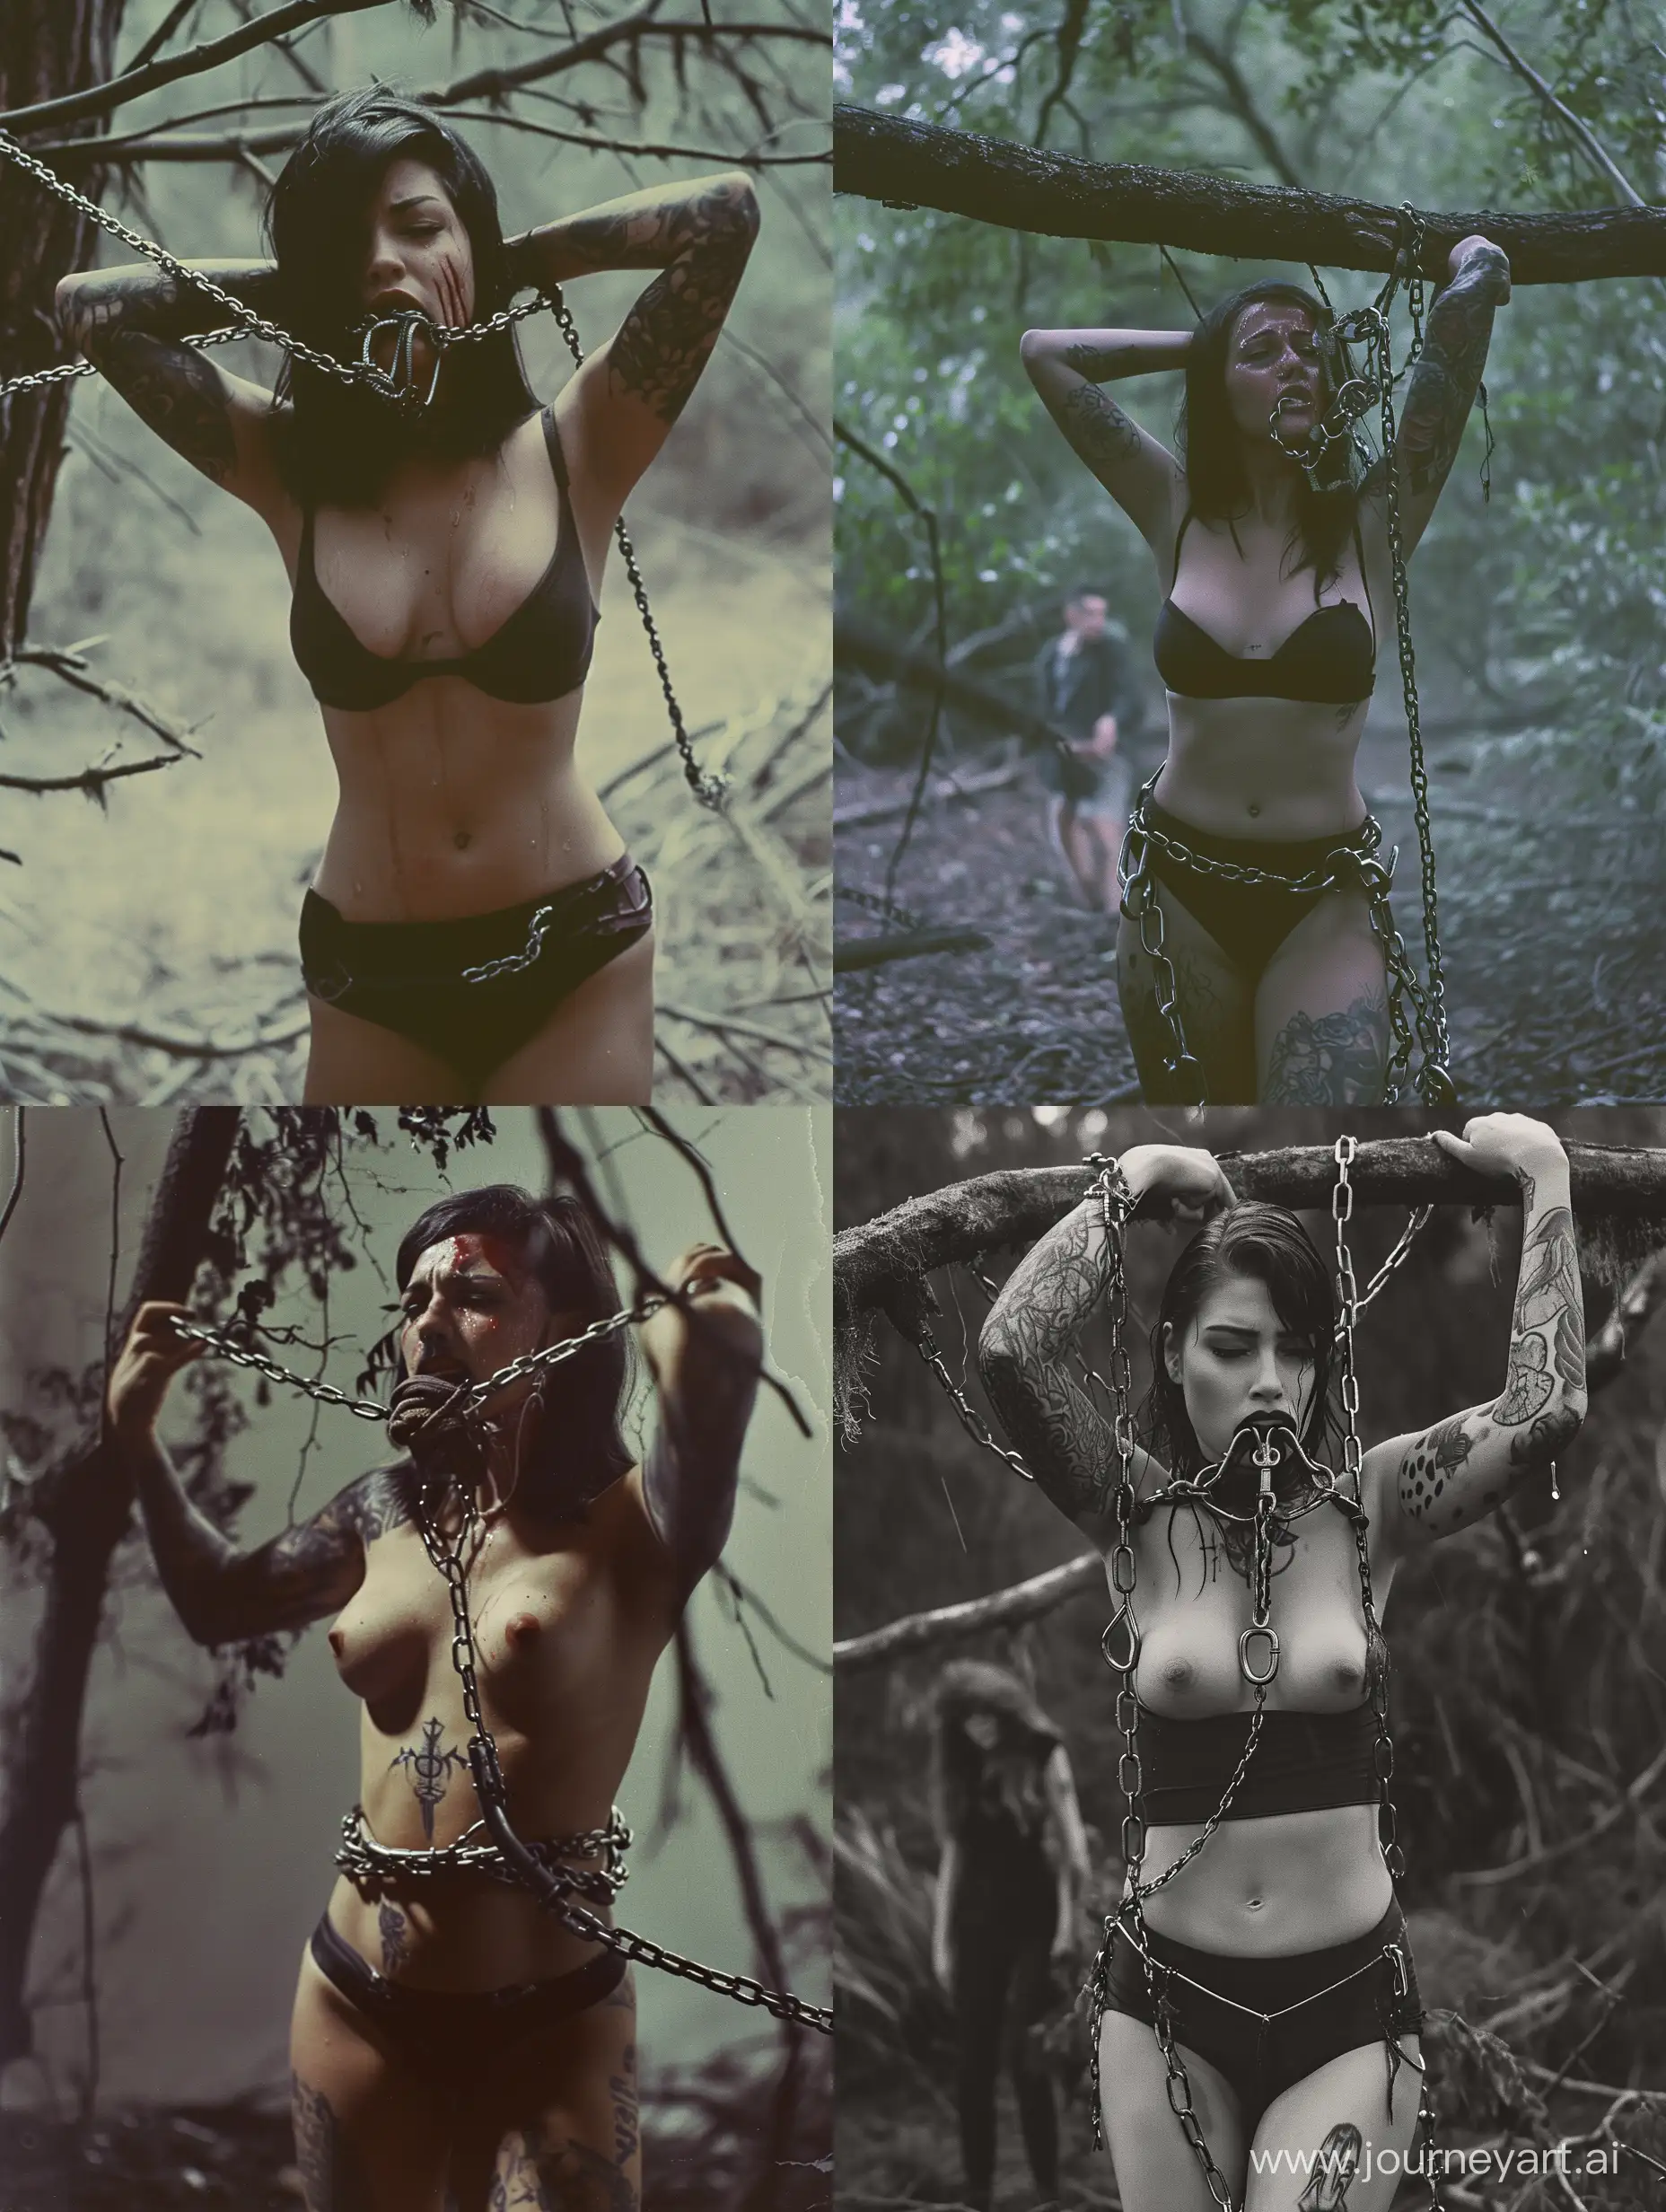 An ominous, very unsettling image of a woman with a chained harness in her mouth, arms bound above her head chained to a tree branch in a minimalistic forest, proportionate body, ominous tattoos, bound with chains, viewer walks up and discovers the scene, tear stained face, dark aesthetic, photo taken with provia